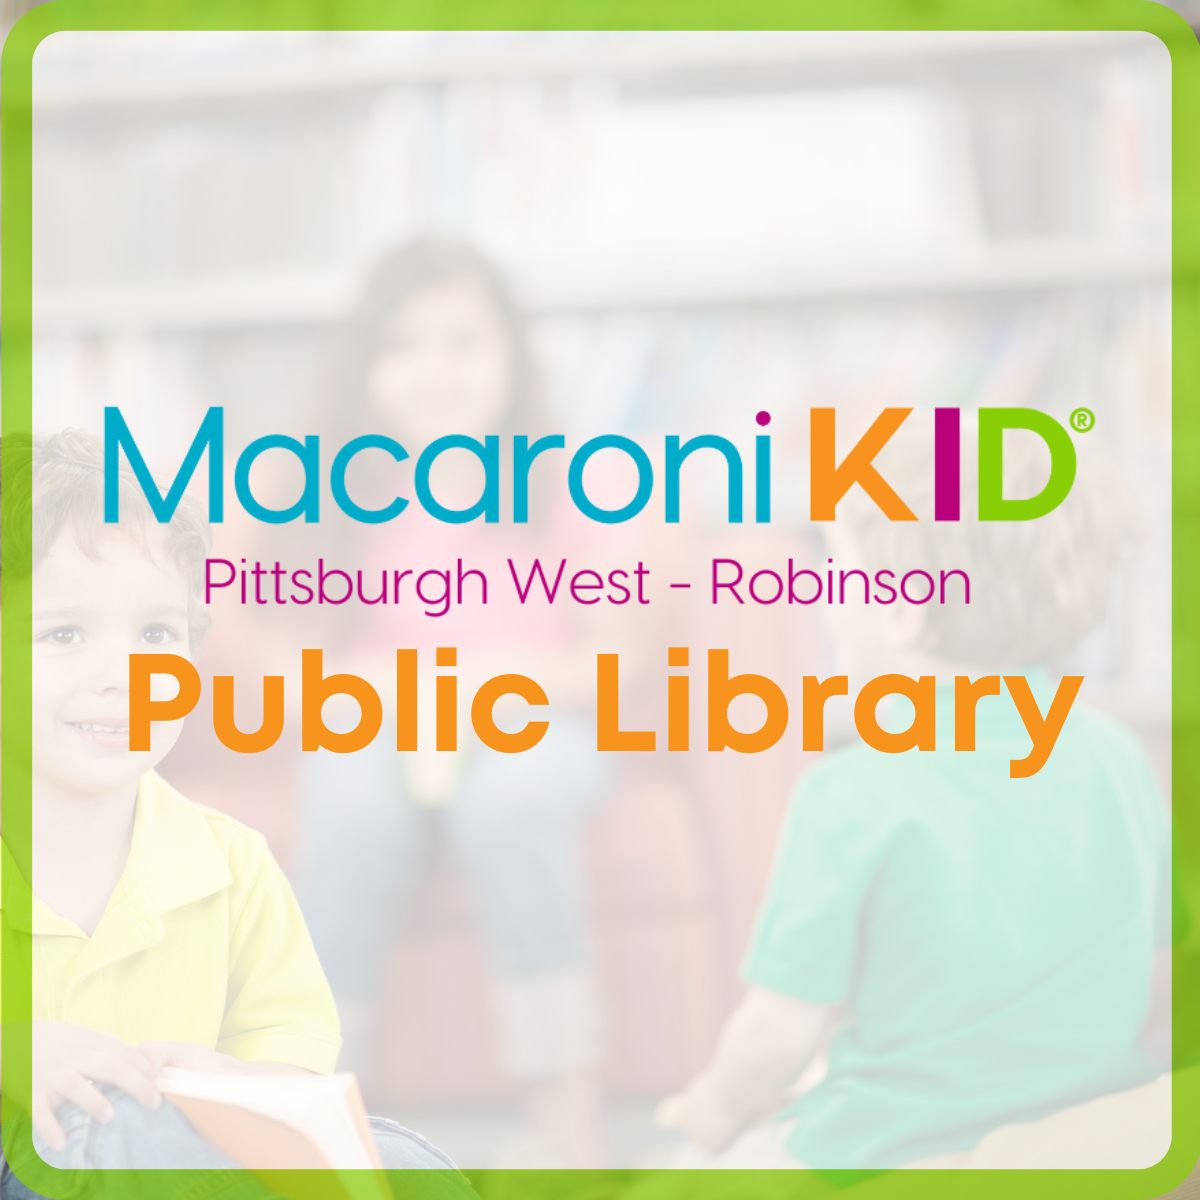 Macaroni Kid Pittsburgh West Public Library